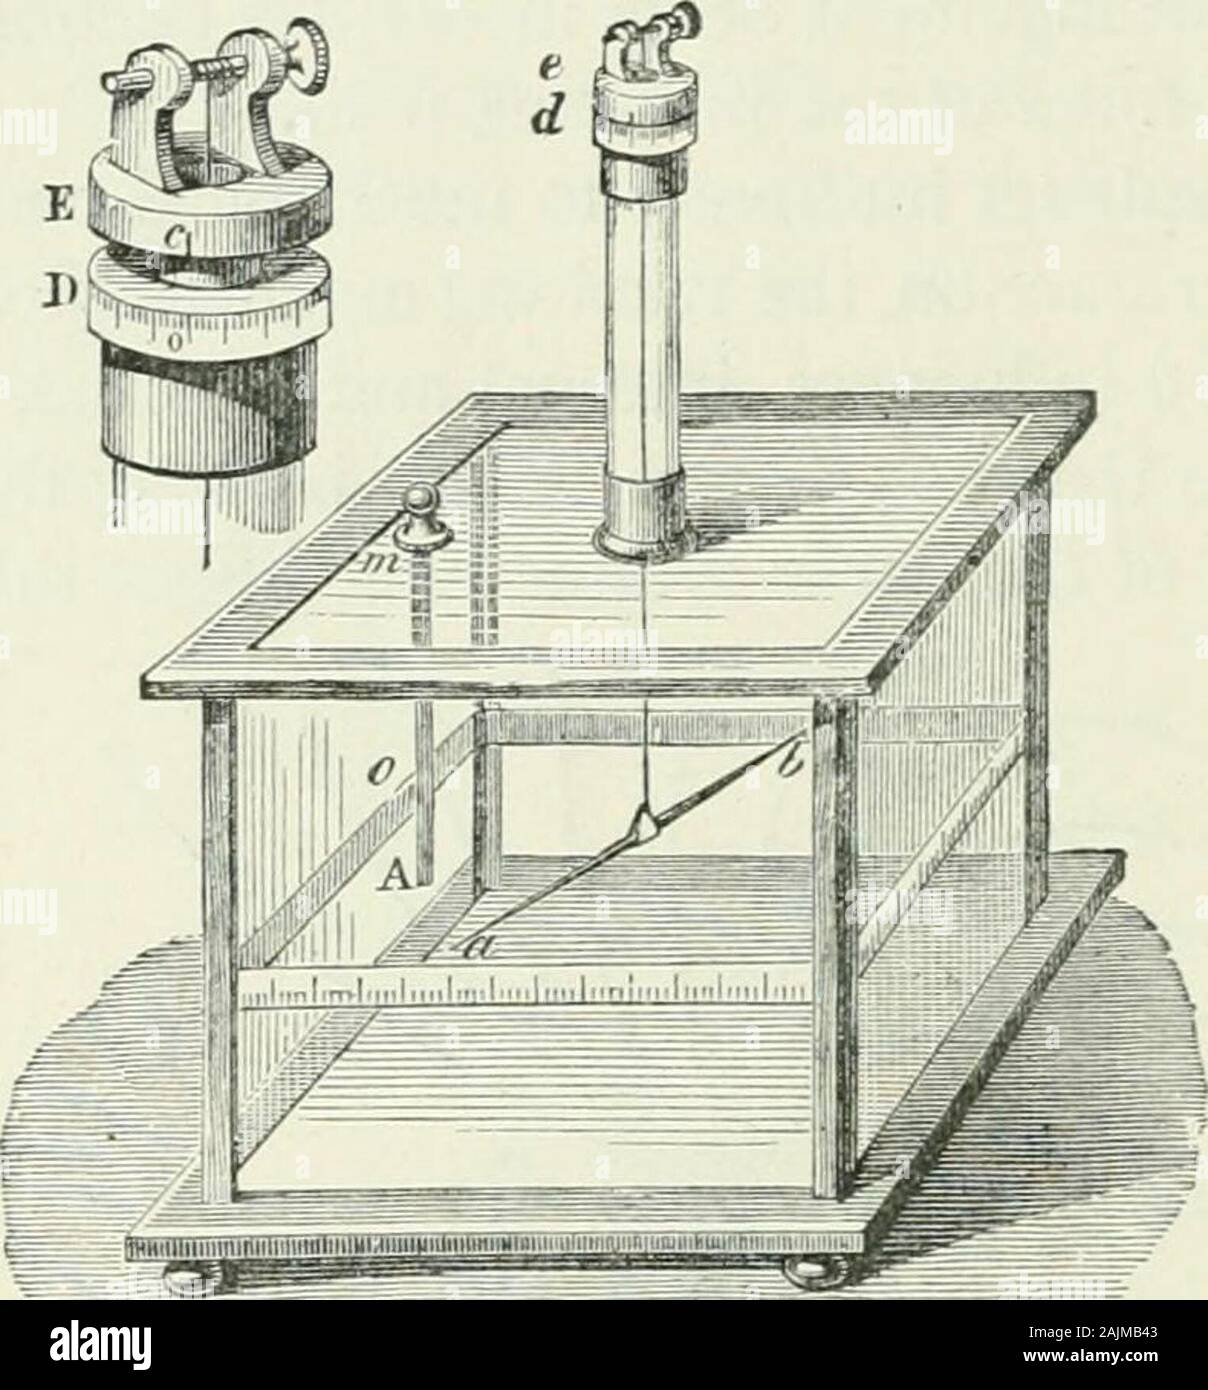 Electricity for public schools and colleges . d some study of it will be in-structive. In practice it has,however, been now super-seded by other instruments.The figure represents oneform of the instrument. Arectangular or cylindricalglass case is provided, eitherwith a graduated scale roundthe sides, as here shown, or,what is better, with a planemirror at the bottom, onwhich is marked a circle 4 graduated in degrees. In what follows we shall ^^^ ^     assume that the latter method ^^*^  :;^^ss=^ Qf graduation has been adopted, and that the centreof this graduated circle is called O. Above the Stock Photo